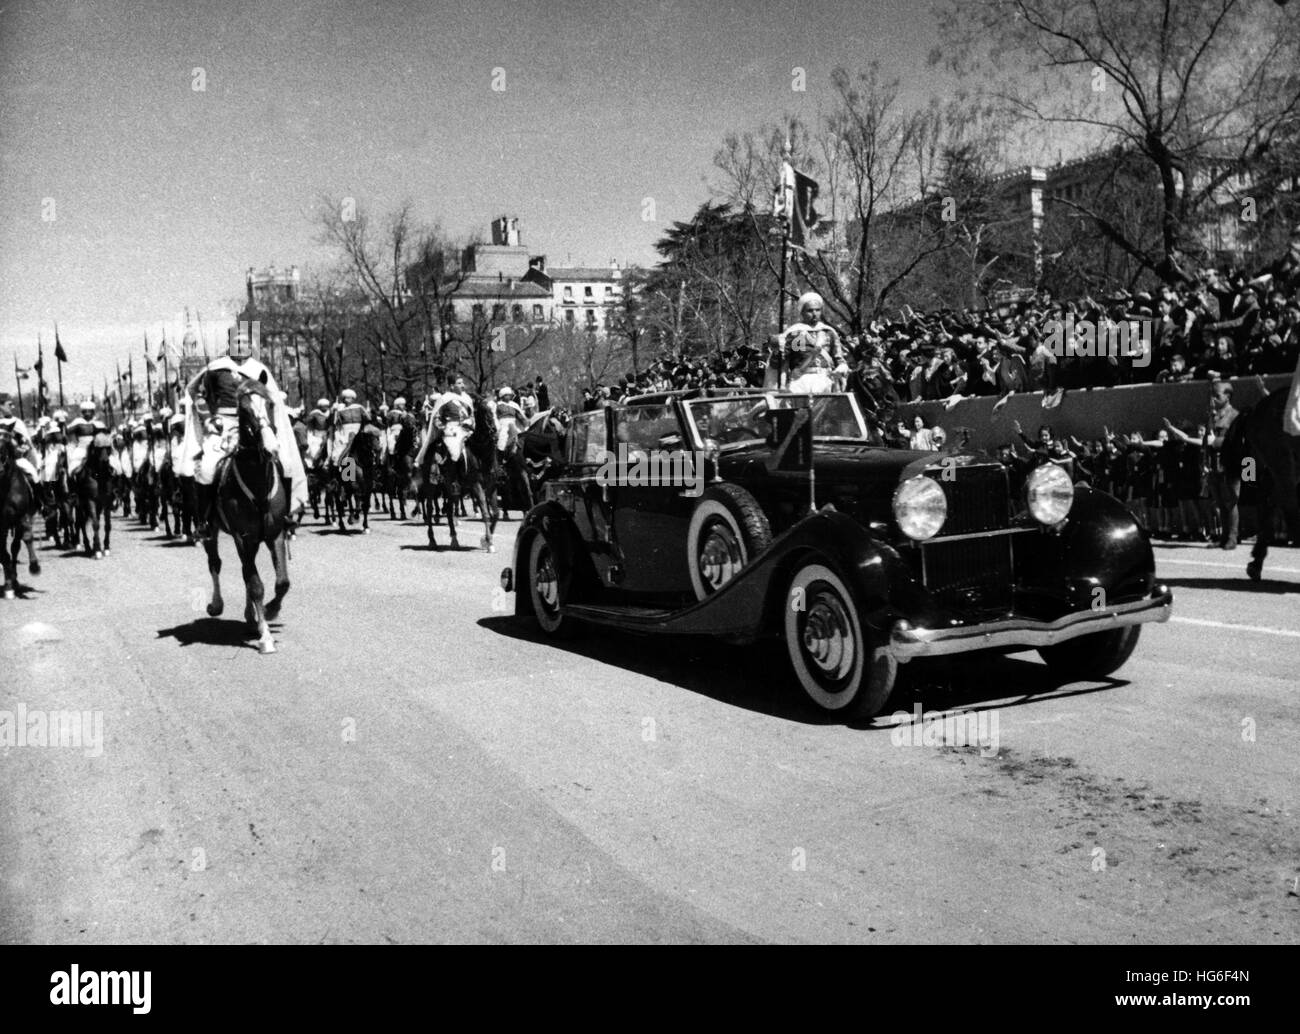 The Nazi propaganda picture shows Spanish dictator Francisco Franco (in the car) accompanied by his Moorish lifeguards in Madrid, Spain, 01 April 1943 during a parade honoring the fourth anniversary of the victory of Francos troops during the Spanish Civil War. Fotoarchiv für Zeitgeschichtee - NO WIRE SERVICE - | usage worldwide Stock Photo